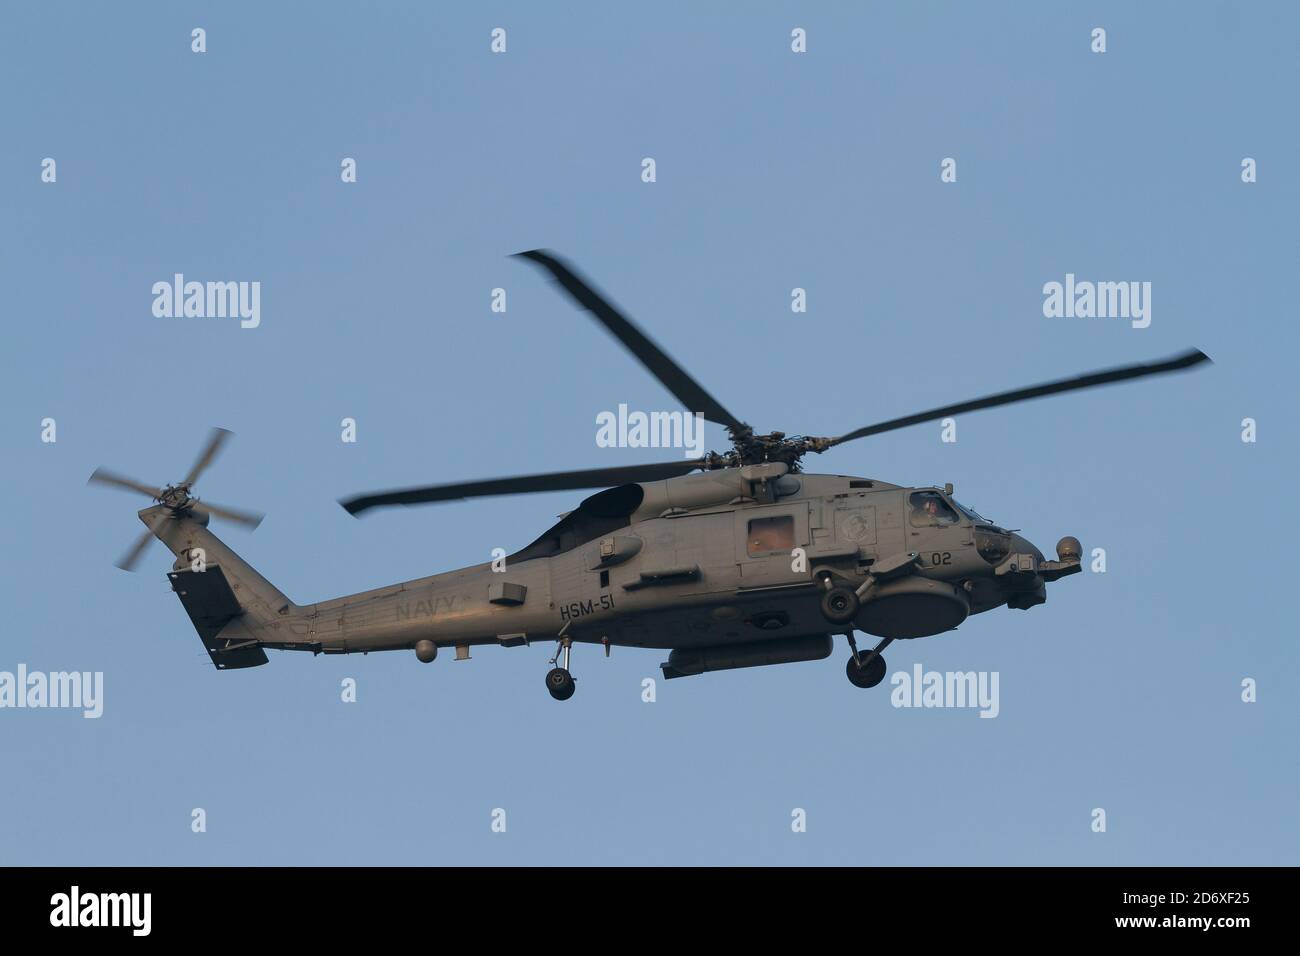 A Sikorsky SH-60 Seahawk helicopter, of Carrier Air Wing Five, flying near Naval Air Facility, Atsugi airbase, Kanagawa, Japan. Stock Photo